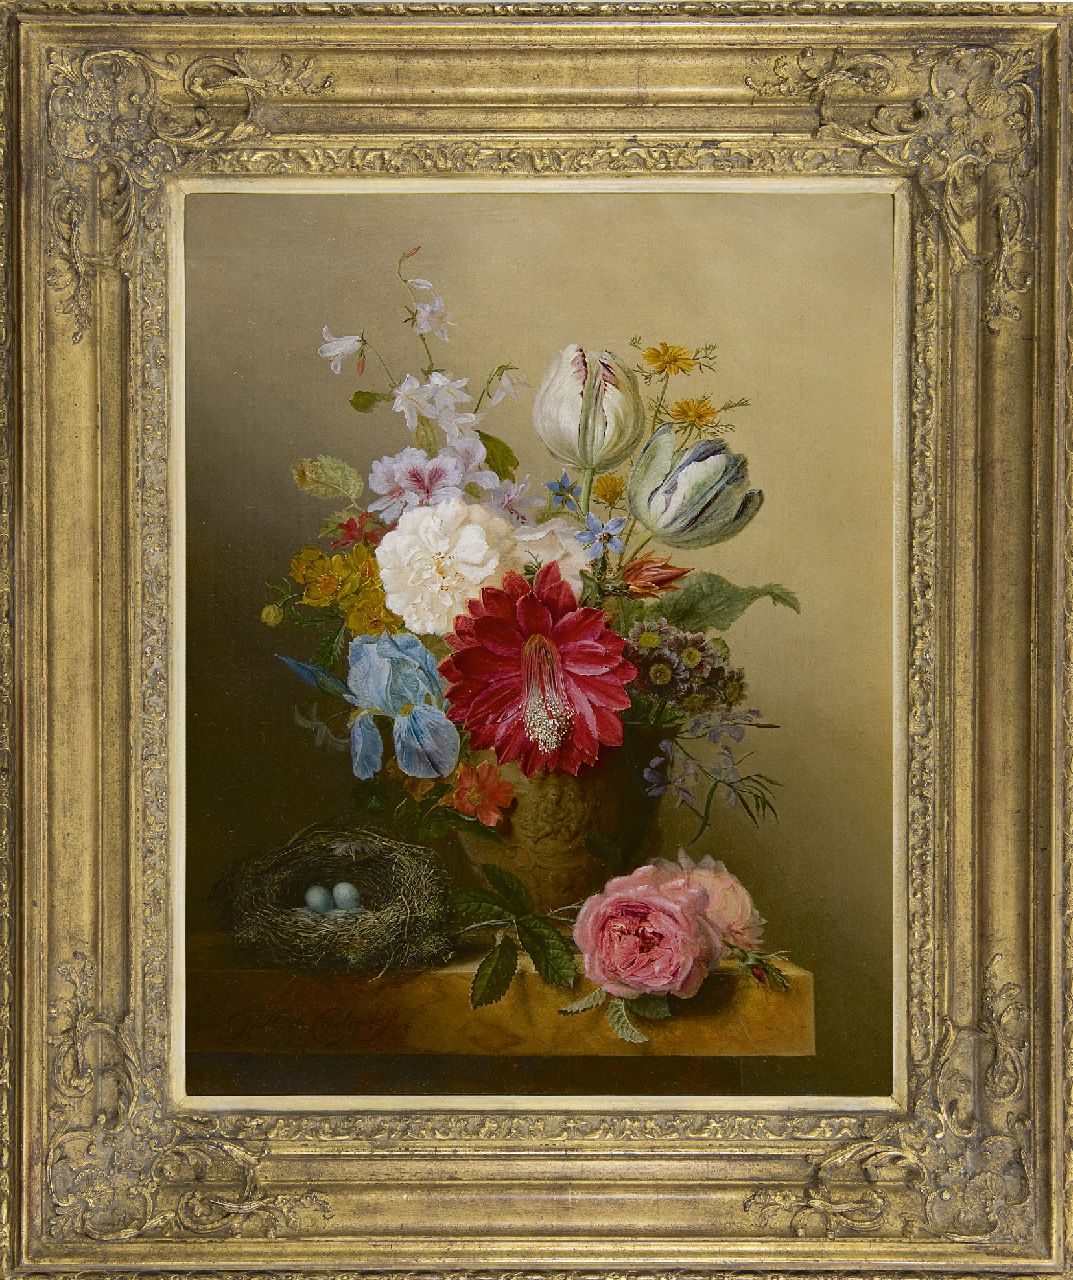 Henriques de Castro G.  | Gabriël Henriques de Castro | Paintings offered for sale | A still life with flowers and a bird's nest, oil on canvas 55.9 x 44.2 cm, signed l.l. and dated 1837